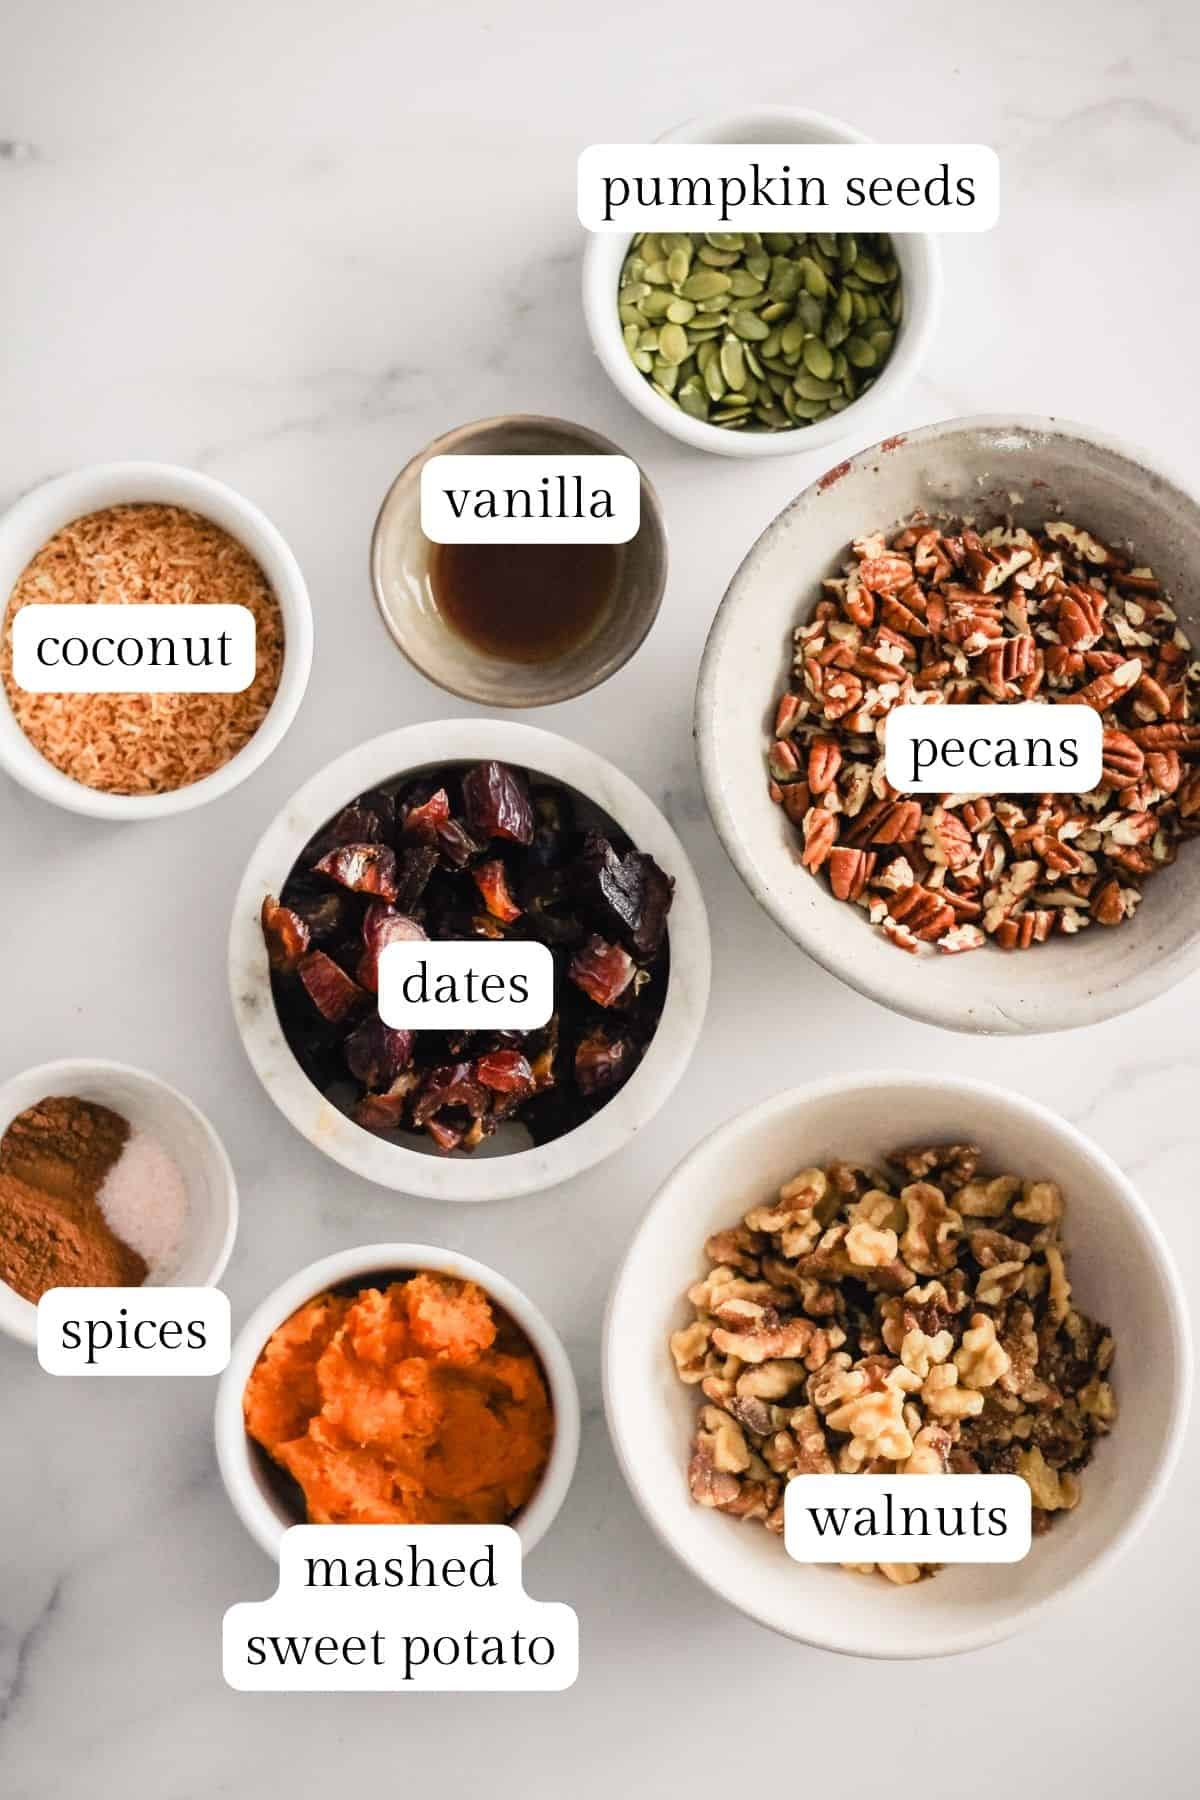 Labeled ingredients for homemade Sweet Potato Energy Bars.